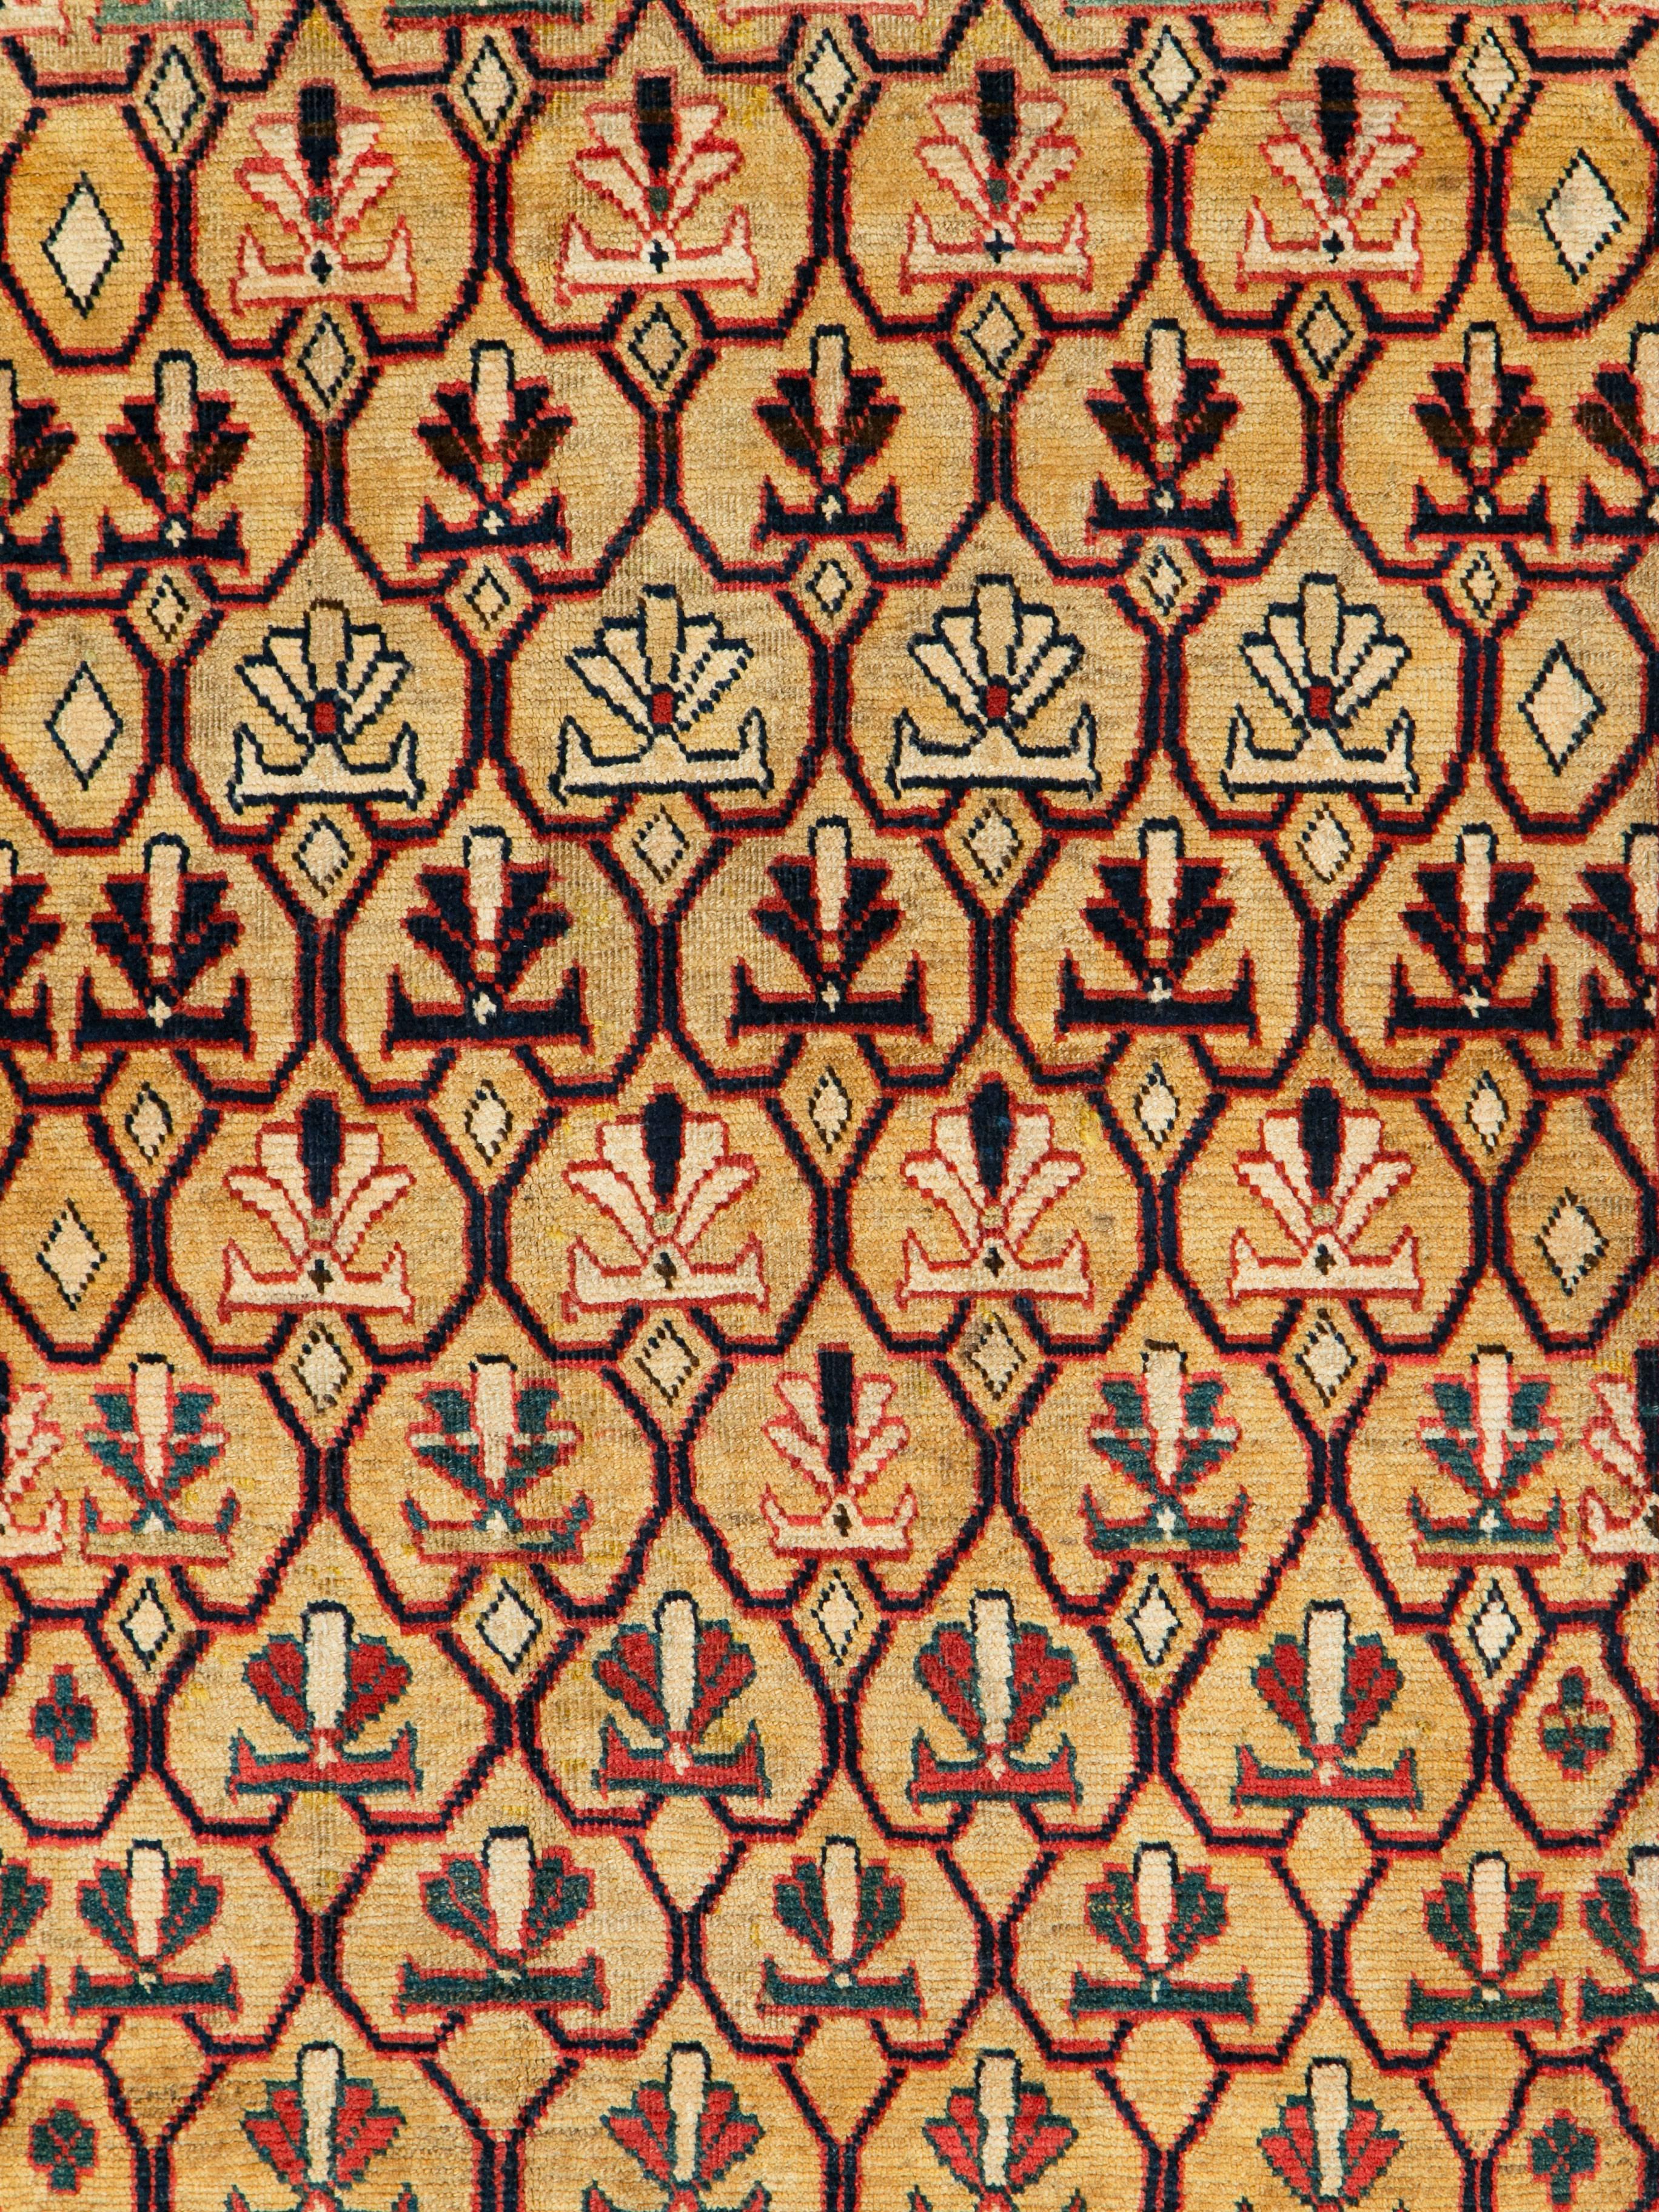 A vintage Persian hamadan rug from the mid-20th century.